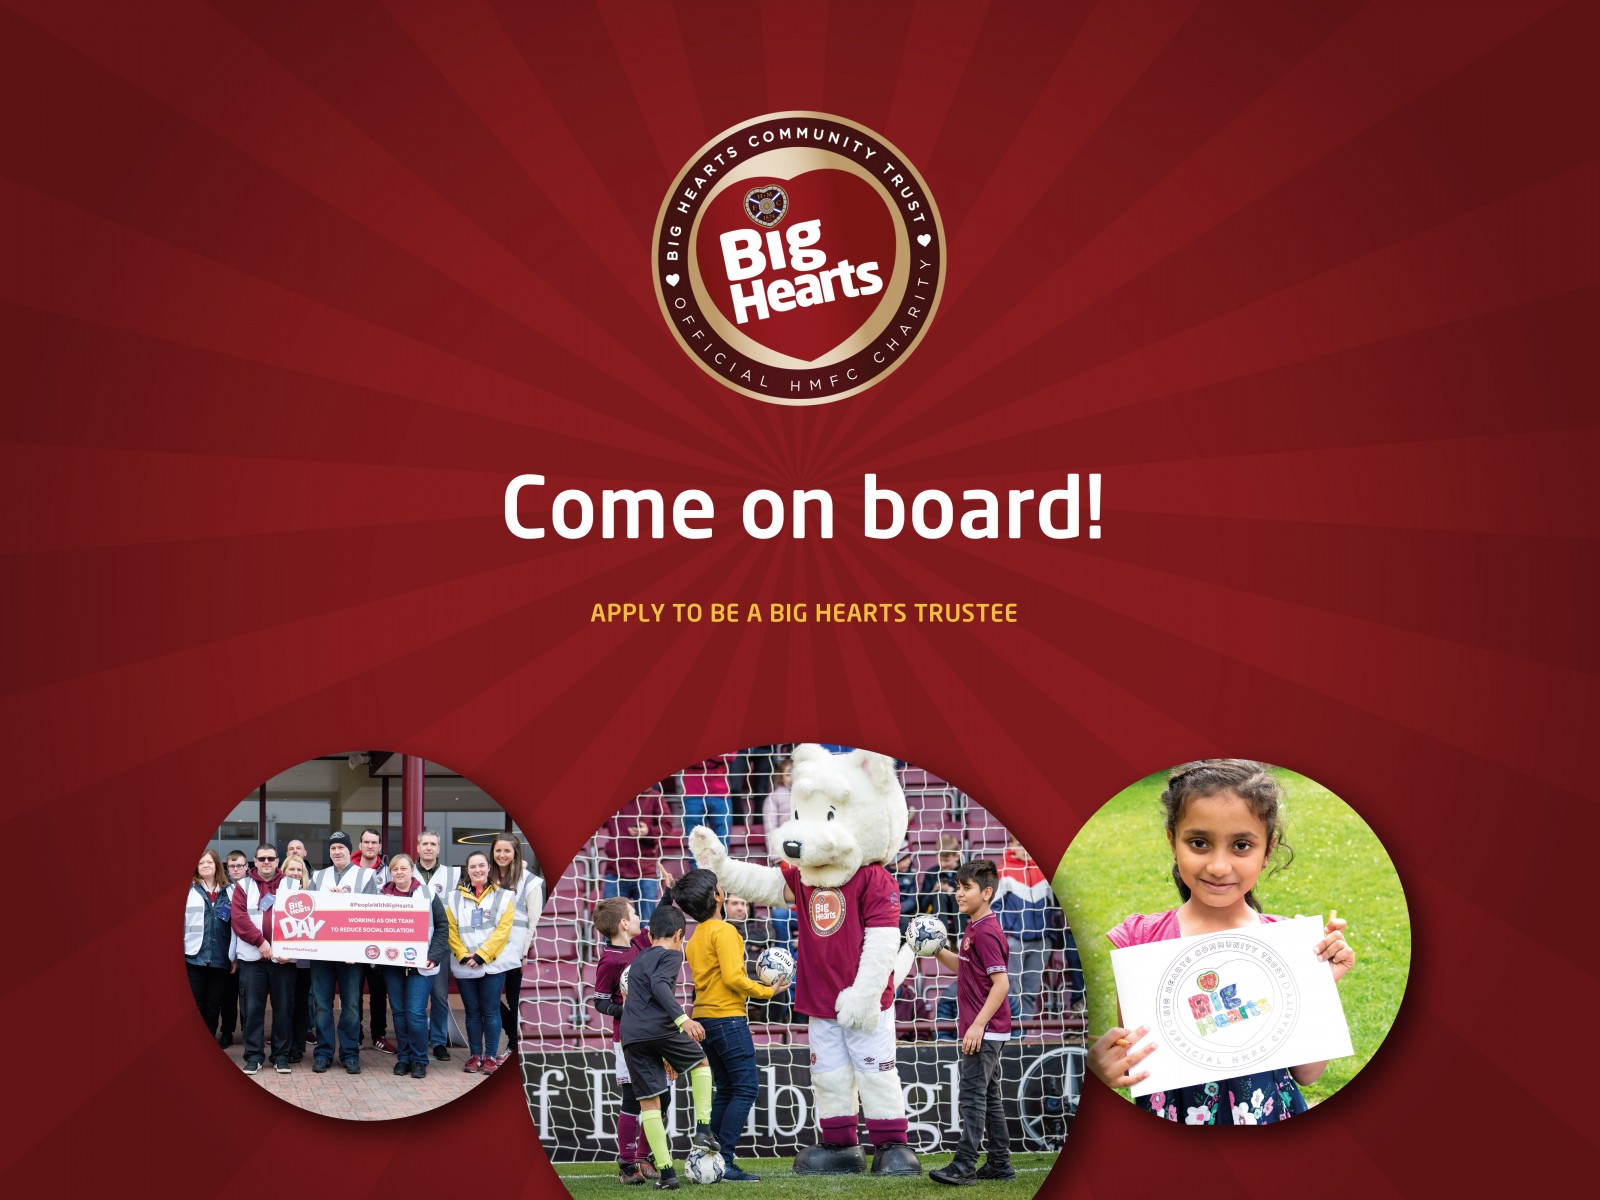  » Come on board – Big Hearts is looking for 2 new Trustees!